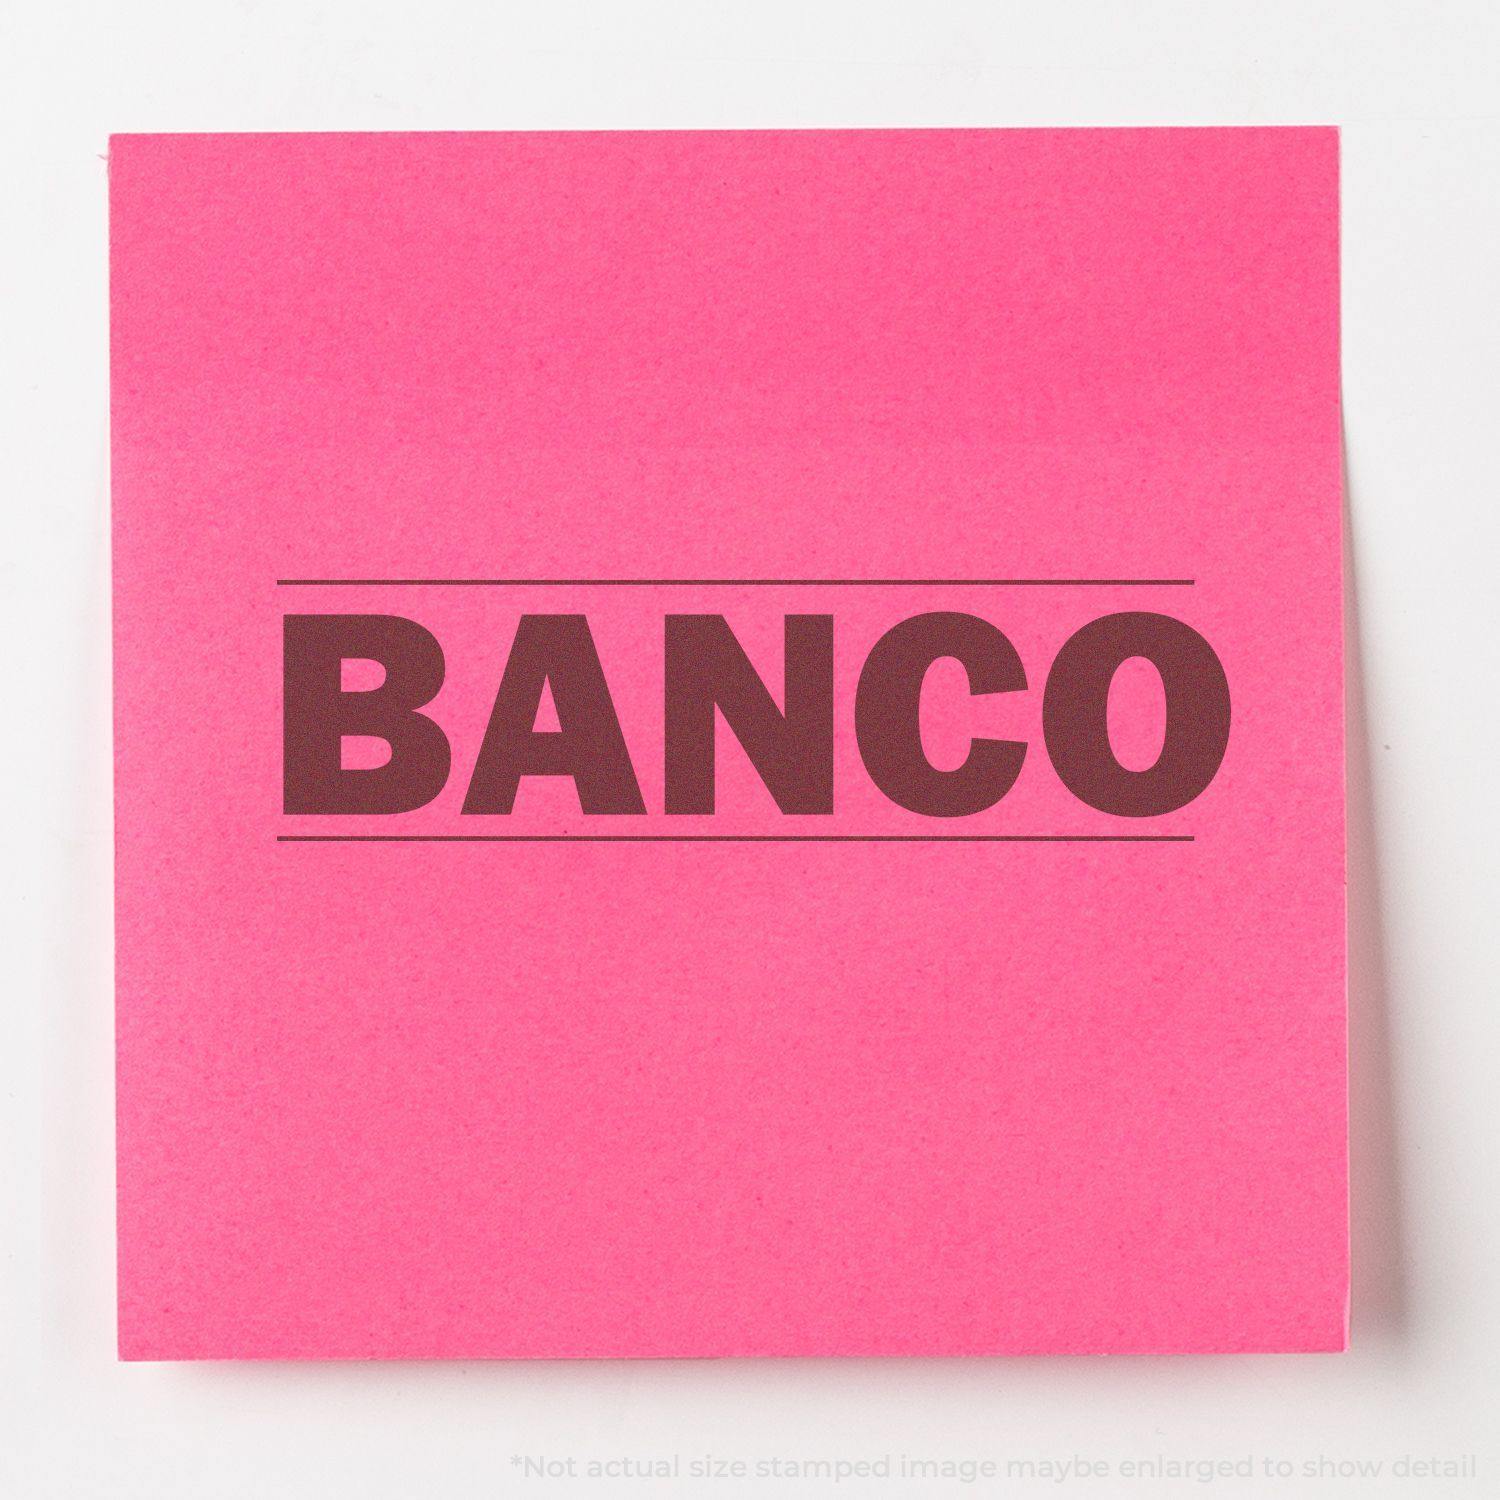 A stock office pre-inked stamp with a stamped image showing how the text "BANCO" in bold font with a line both above and below the text is displayed after stamping.